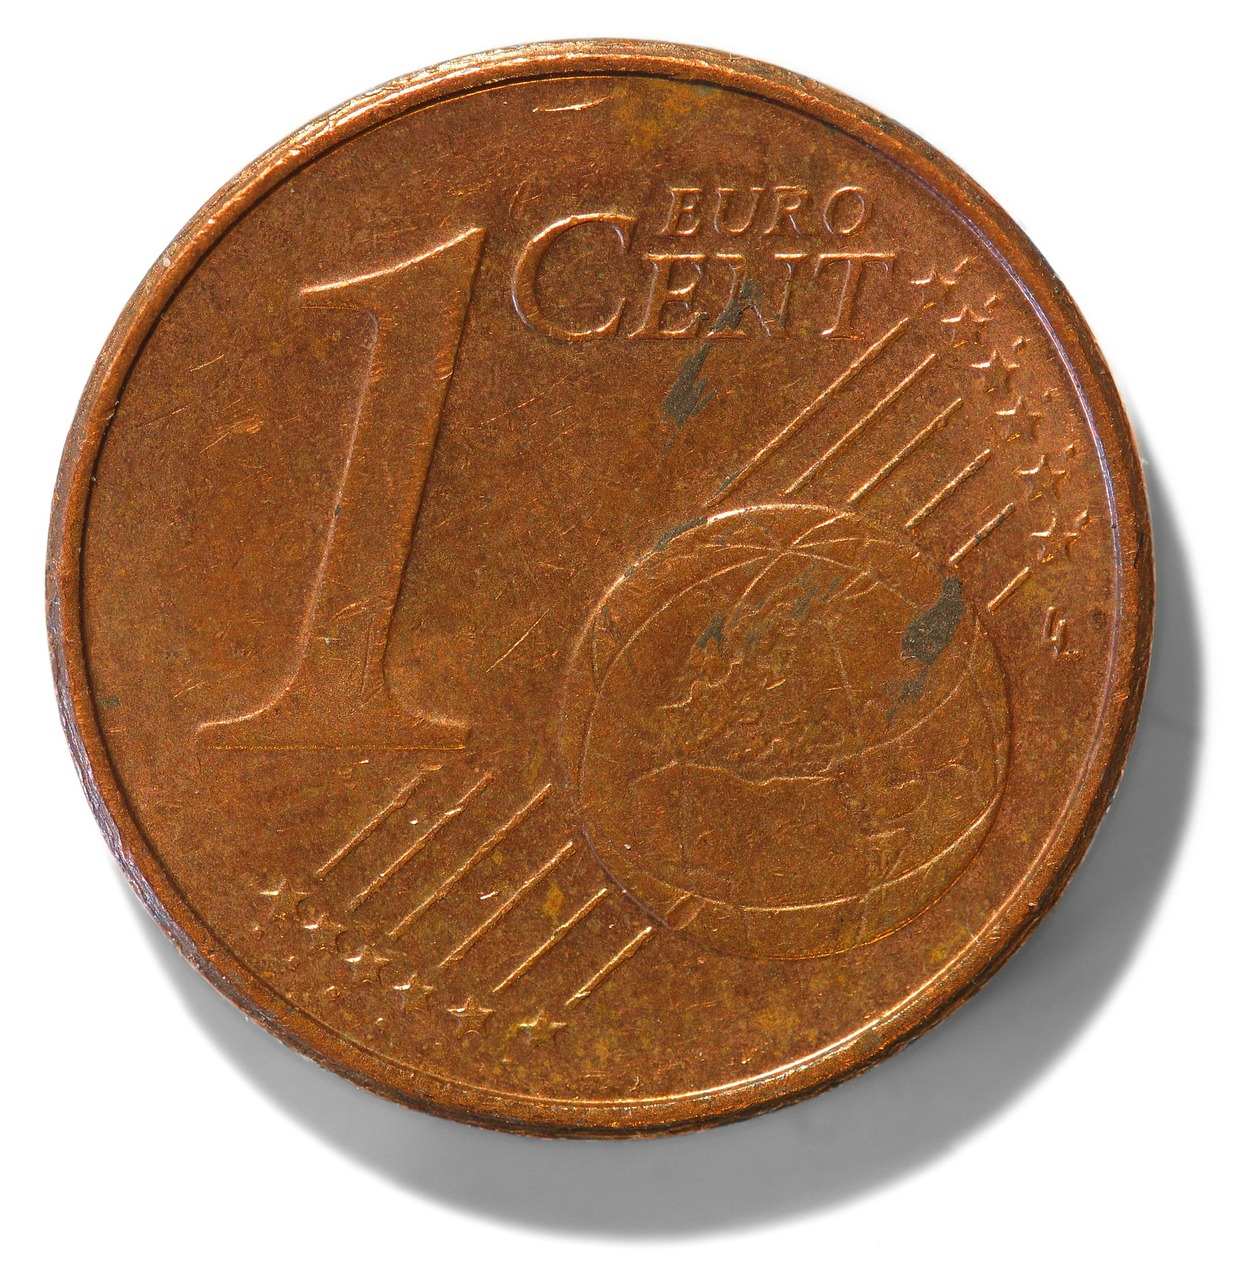 euro cent currency free photo